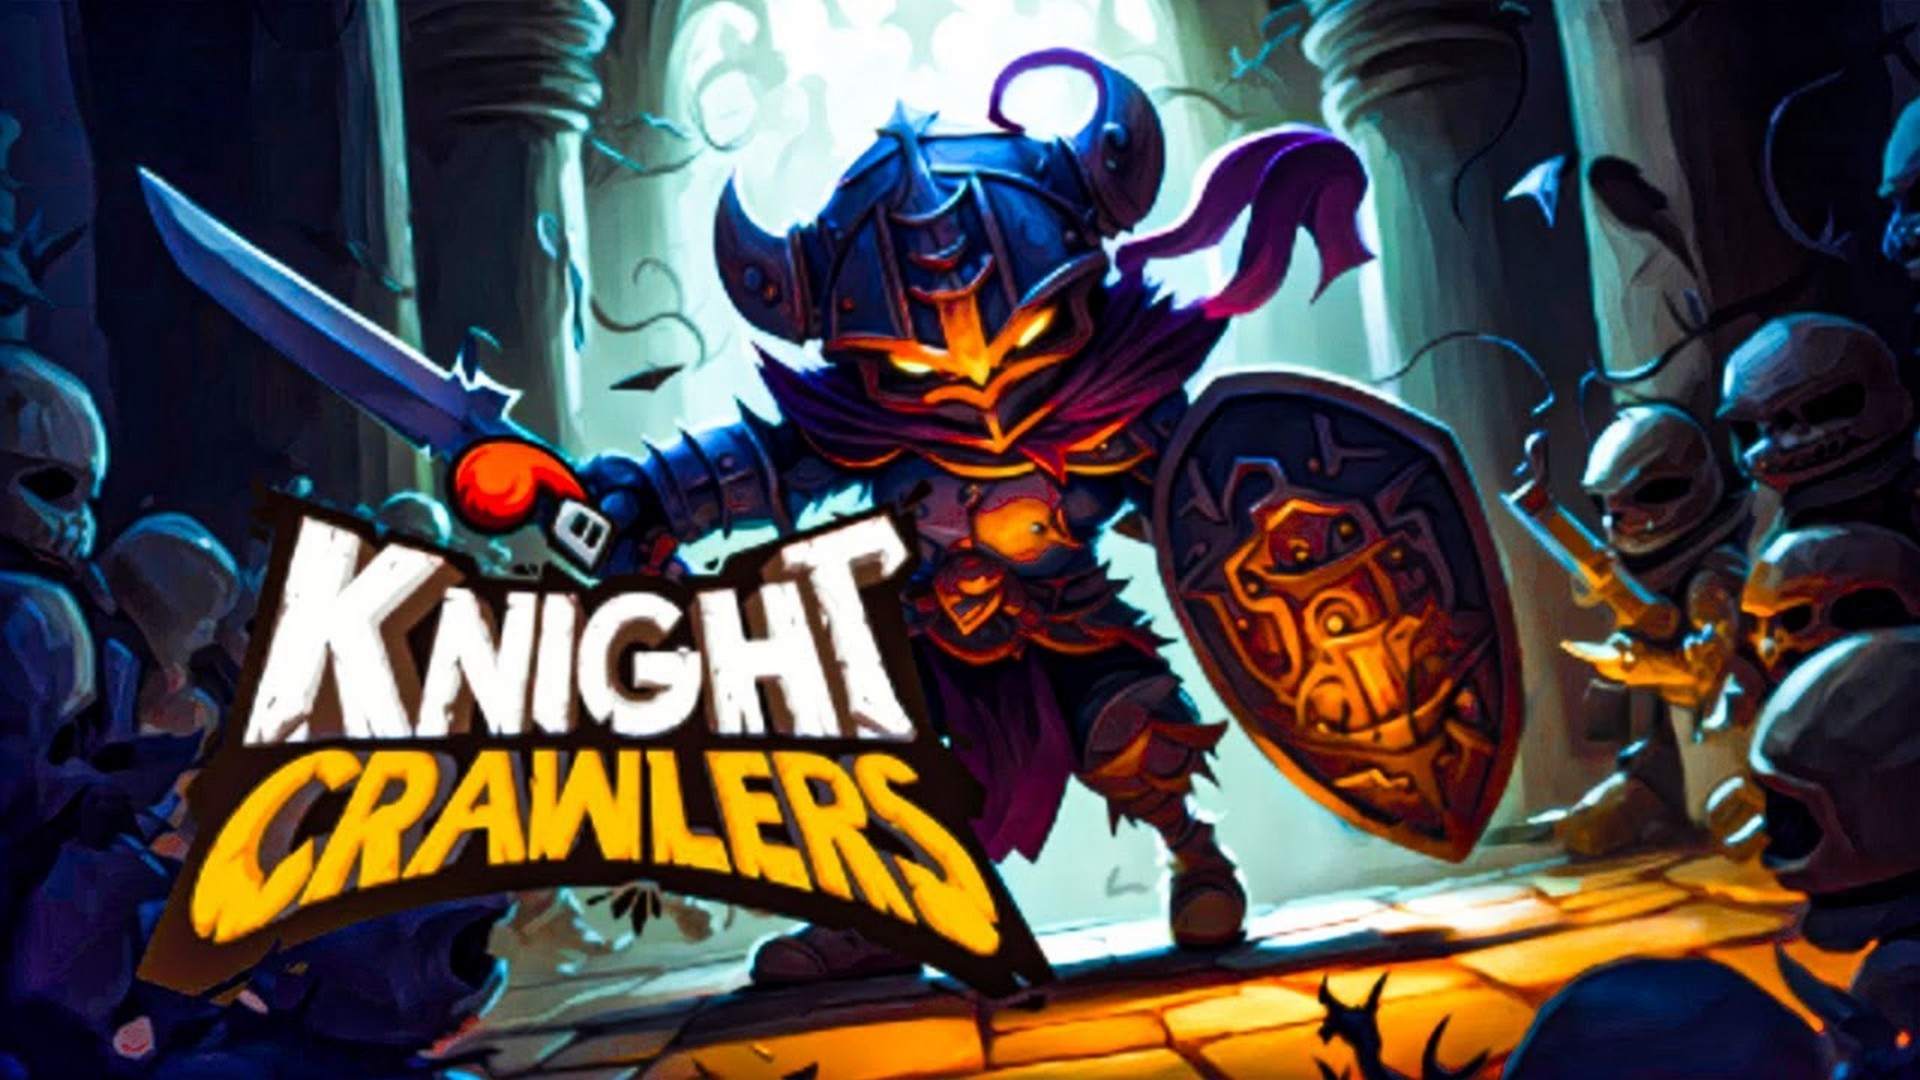 Physics-Based Dungeon Crawler Knight Crawlers Out Now On Steam